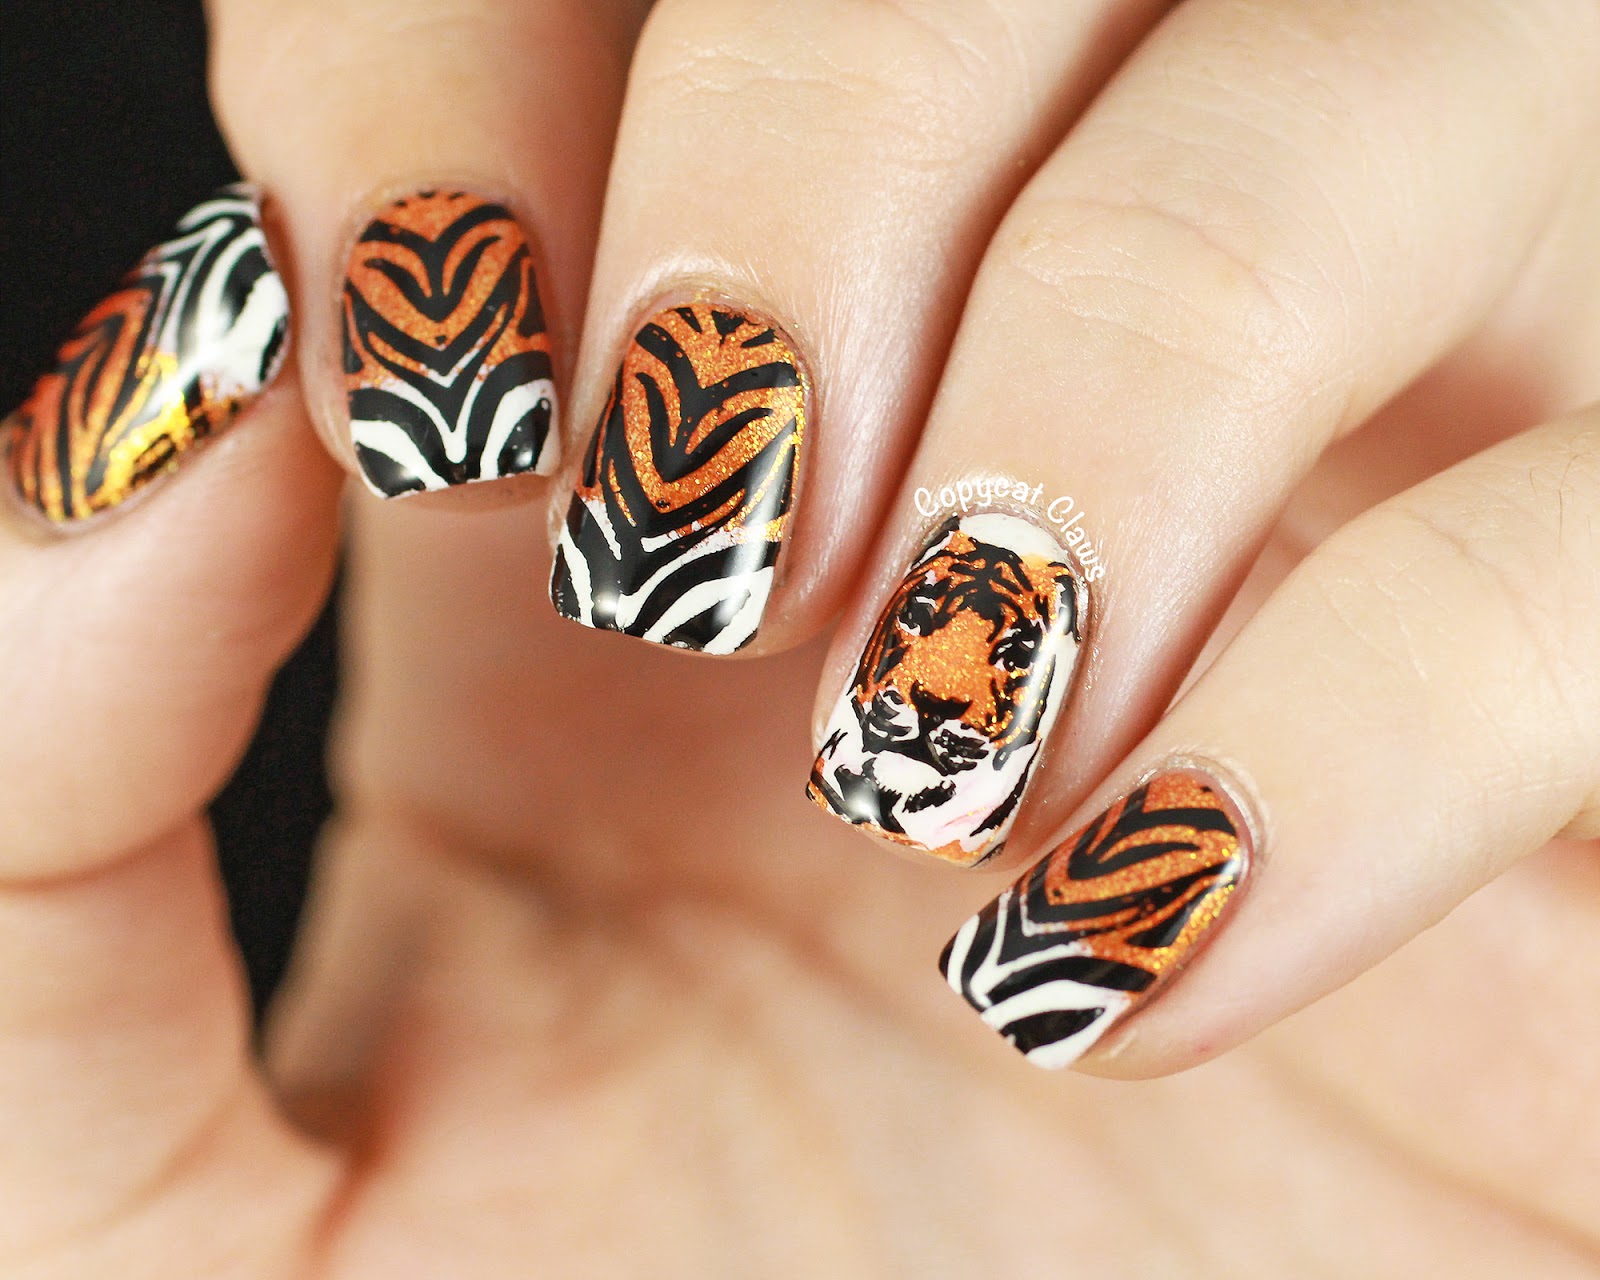 7. 10+ Easy Tiger Nail Designs for Beginners - wide 4